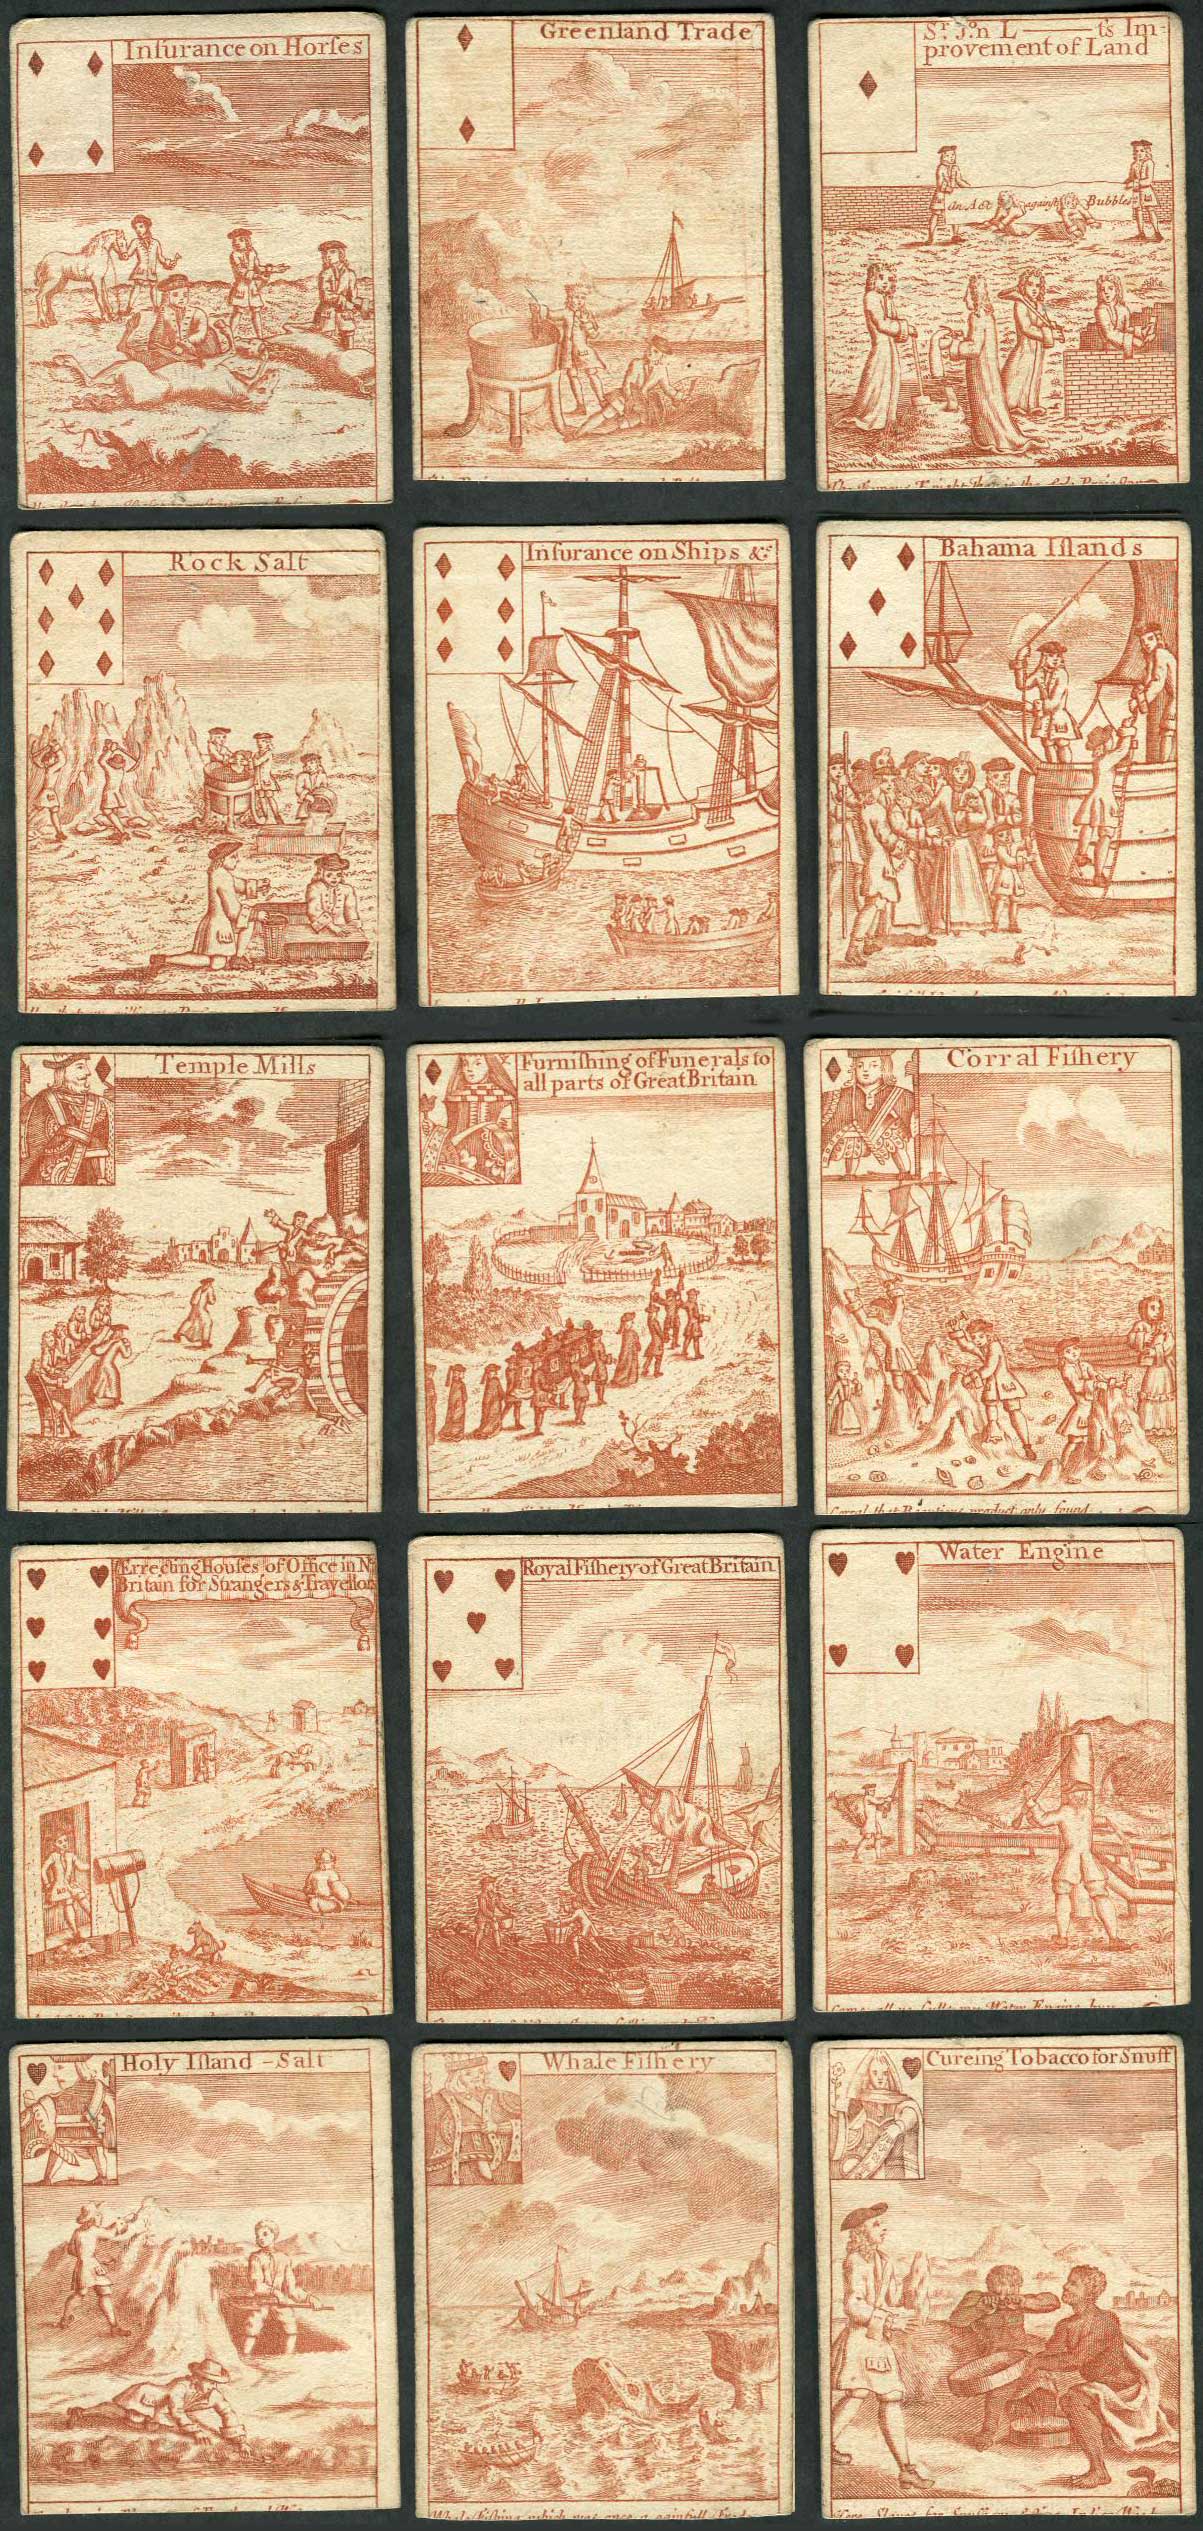 Bubble Cards - known as “All the Bubbles”, c.1720